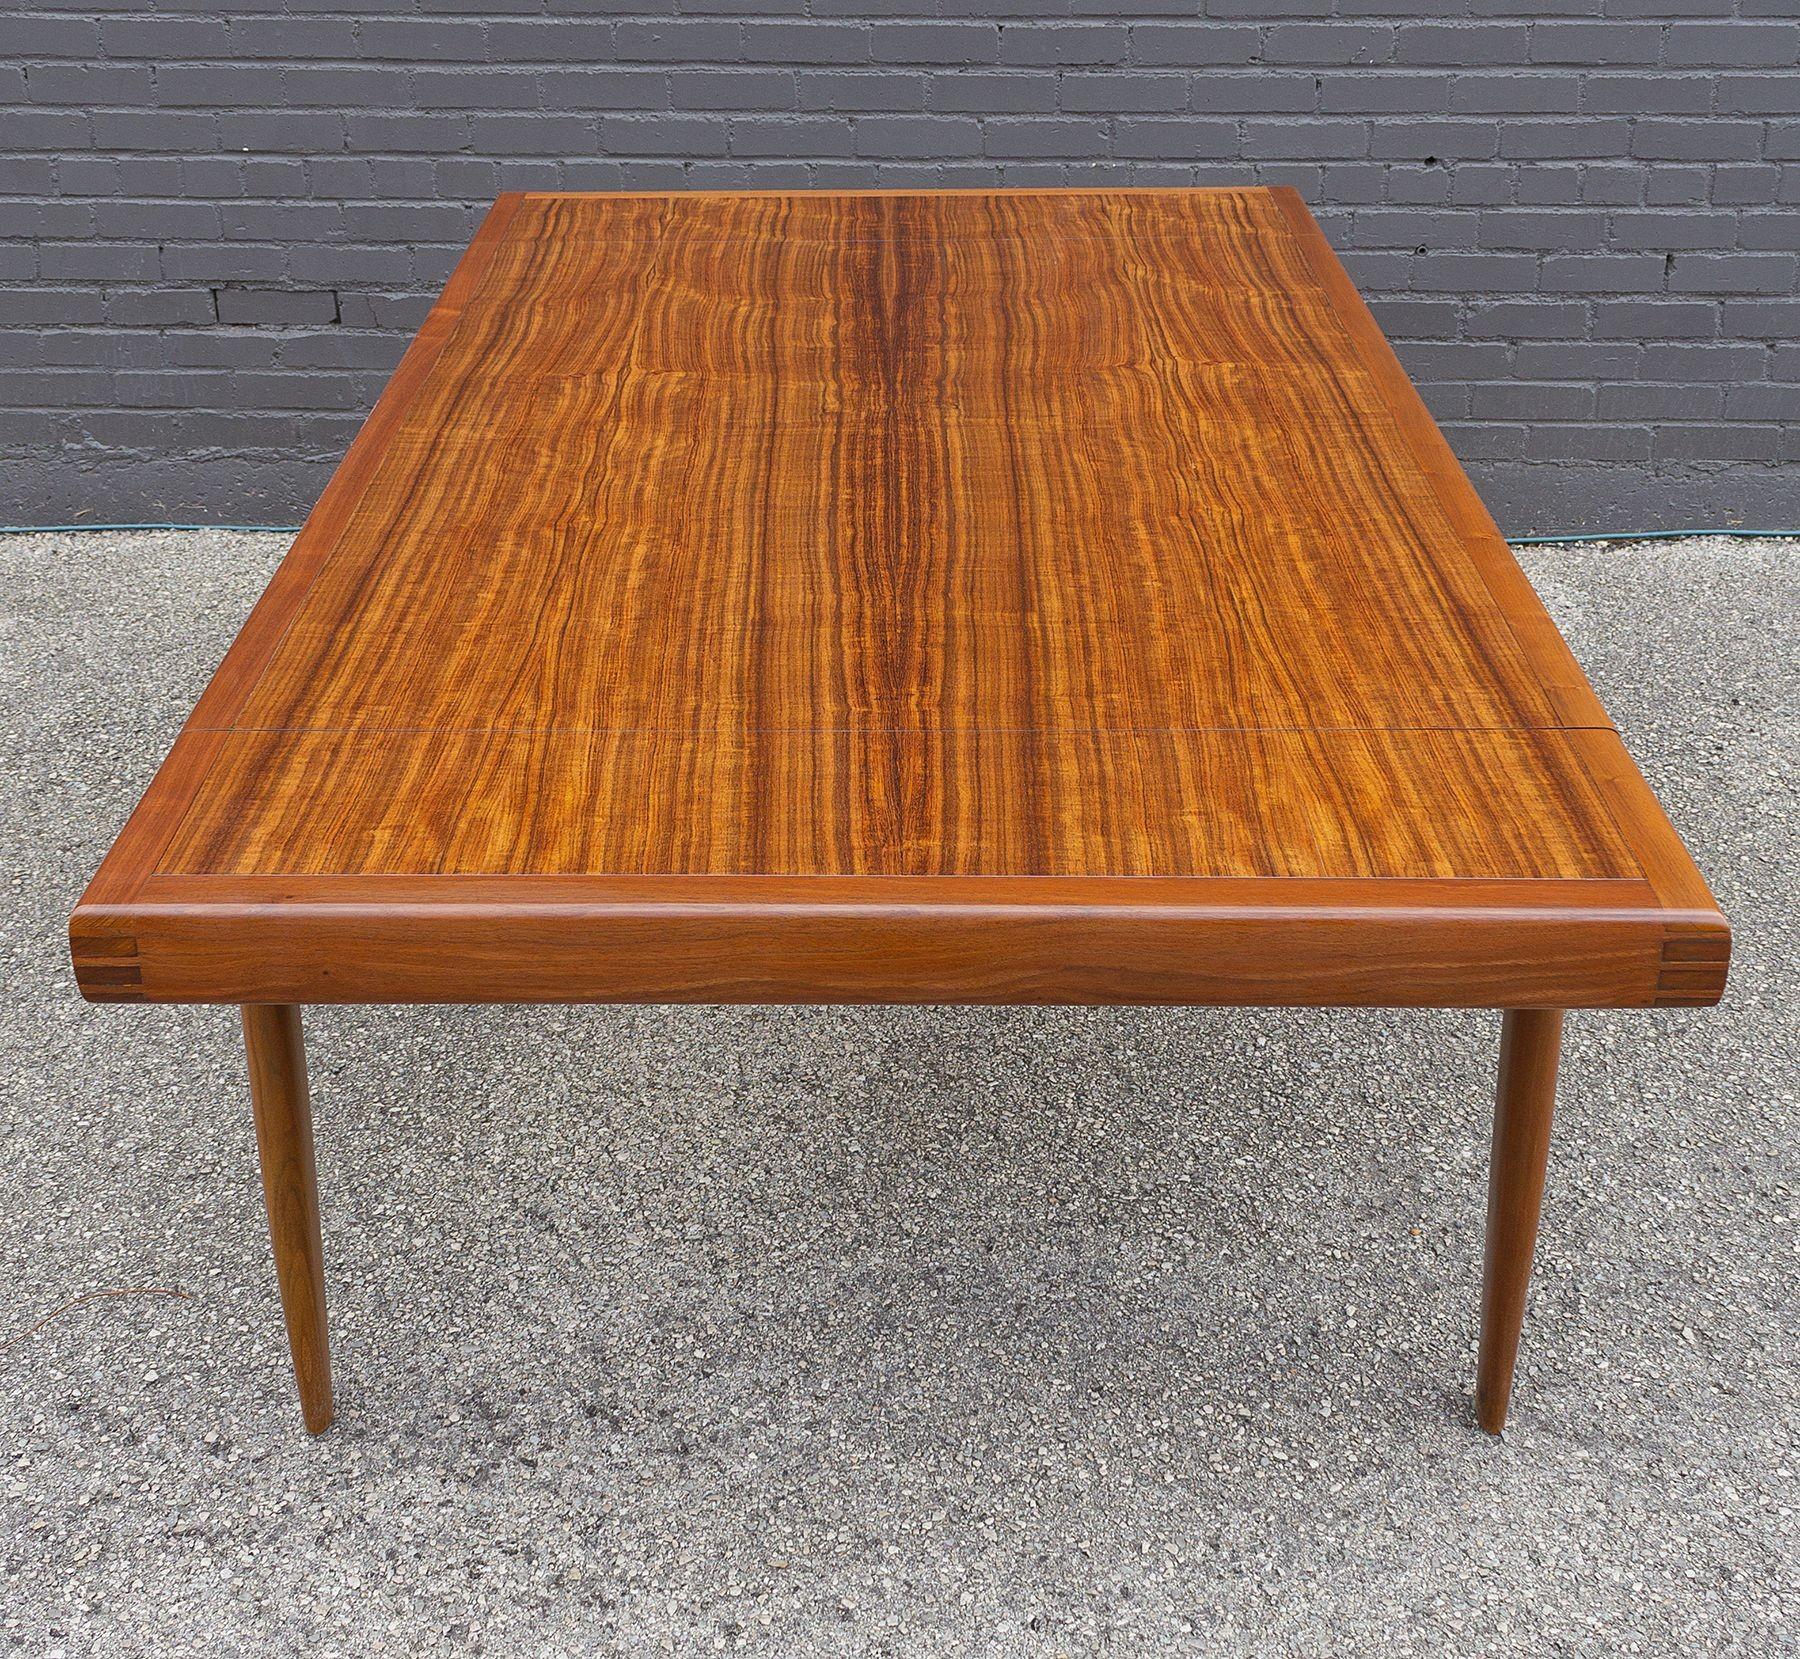 George Nakashima Dining Table with Extensions Widdicomb Origins Collection 1959 2